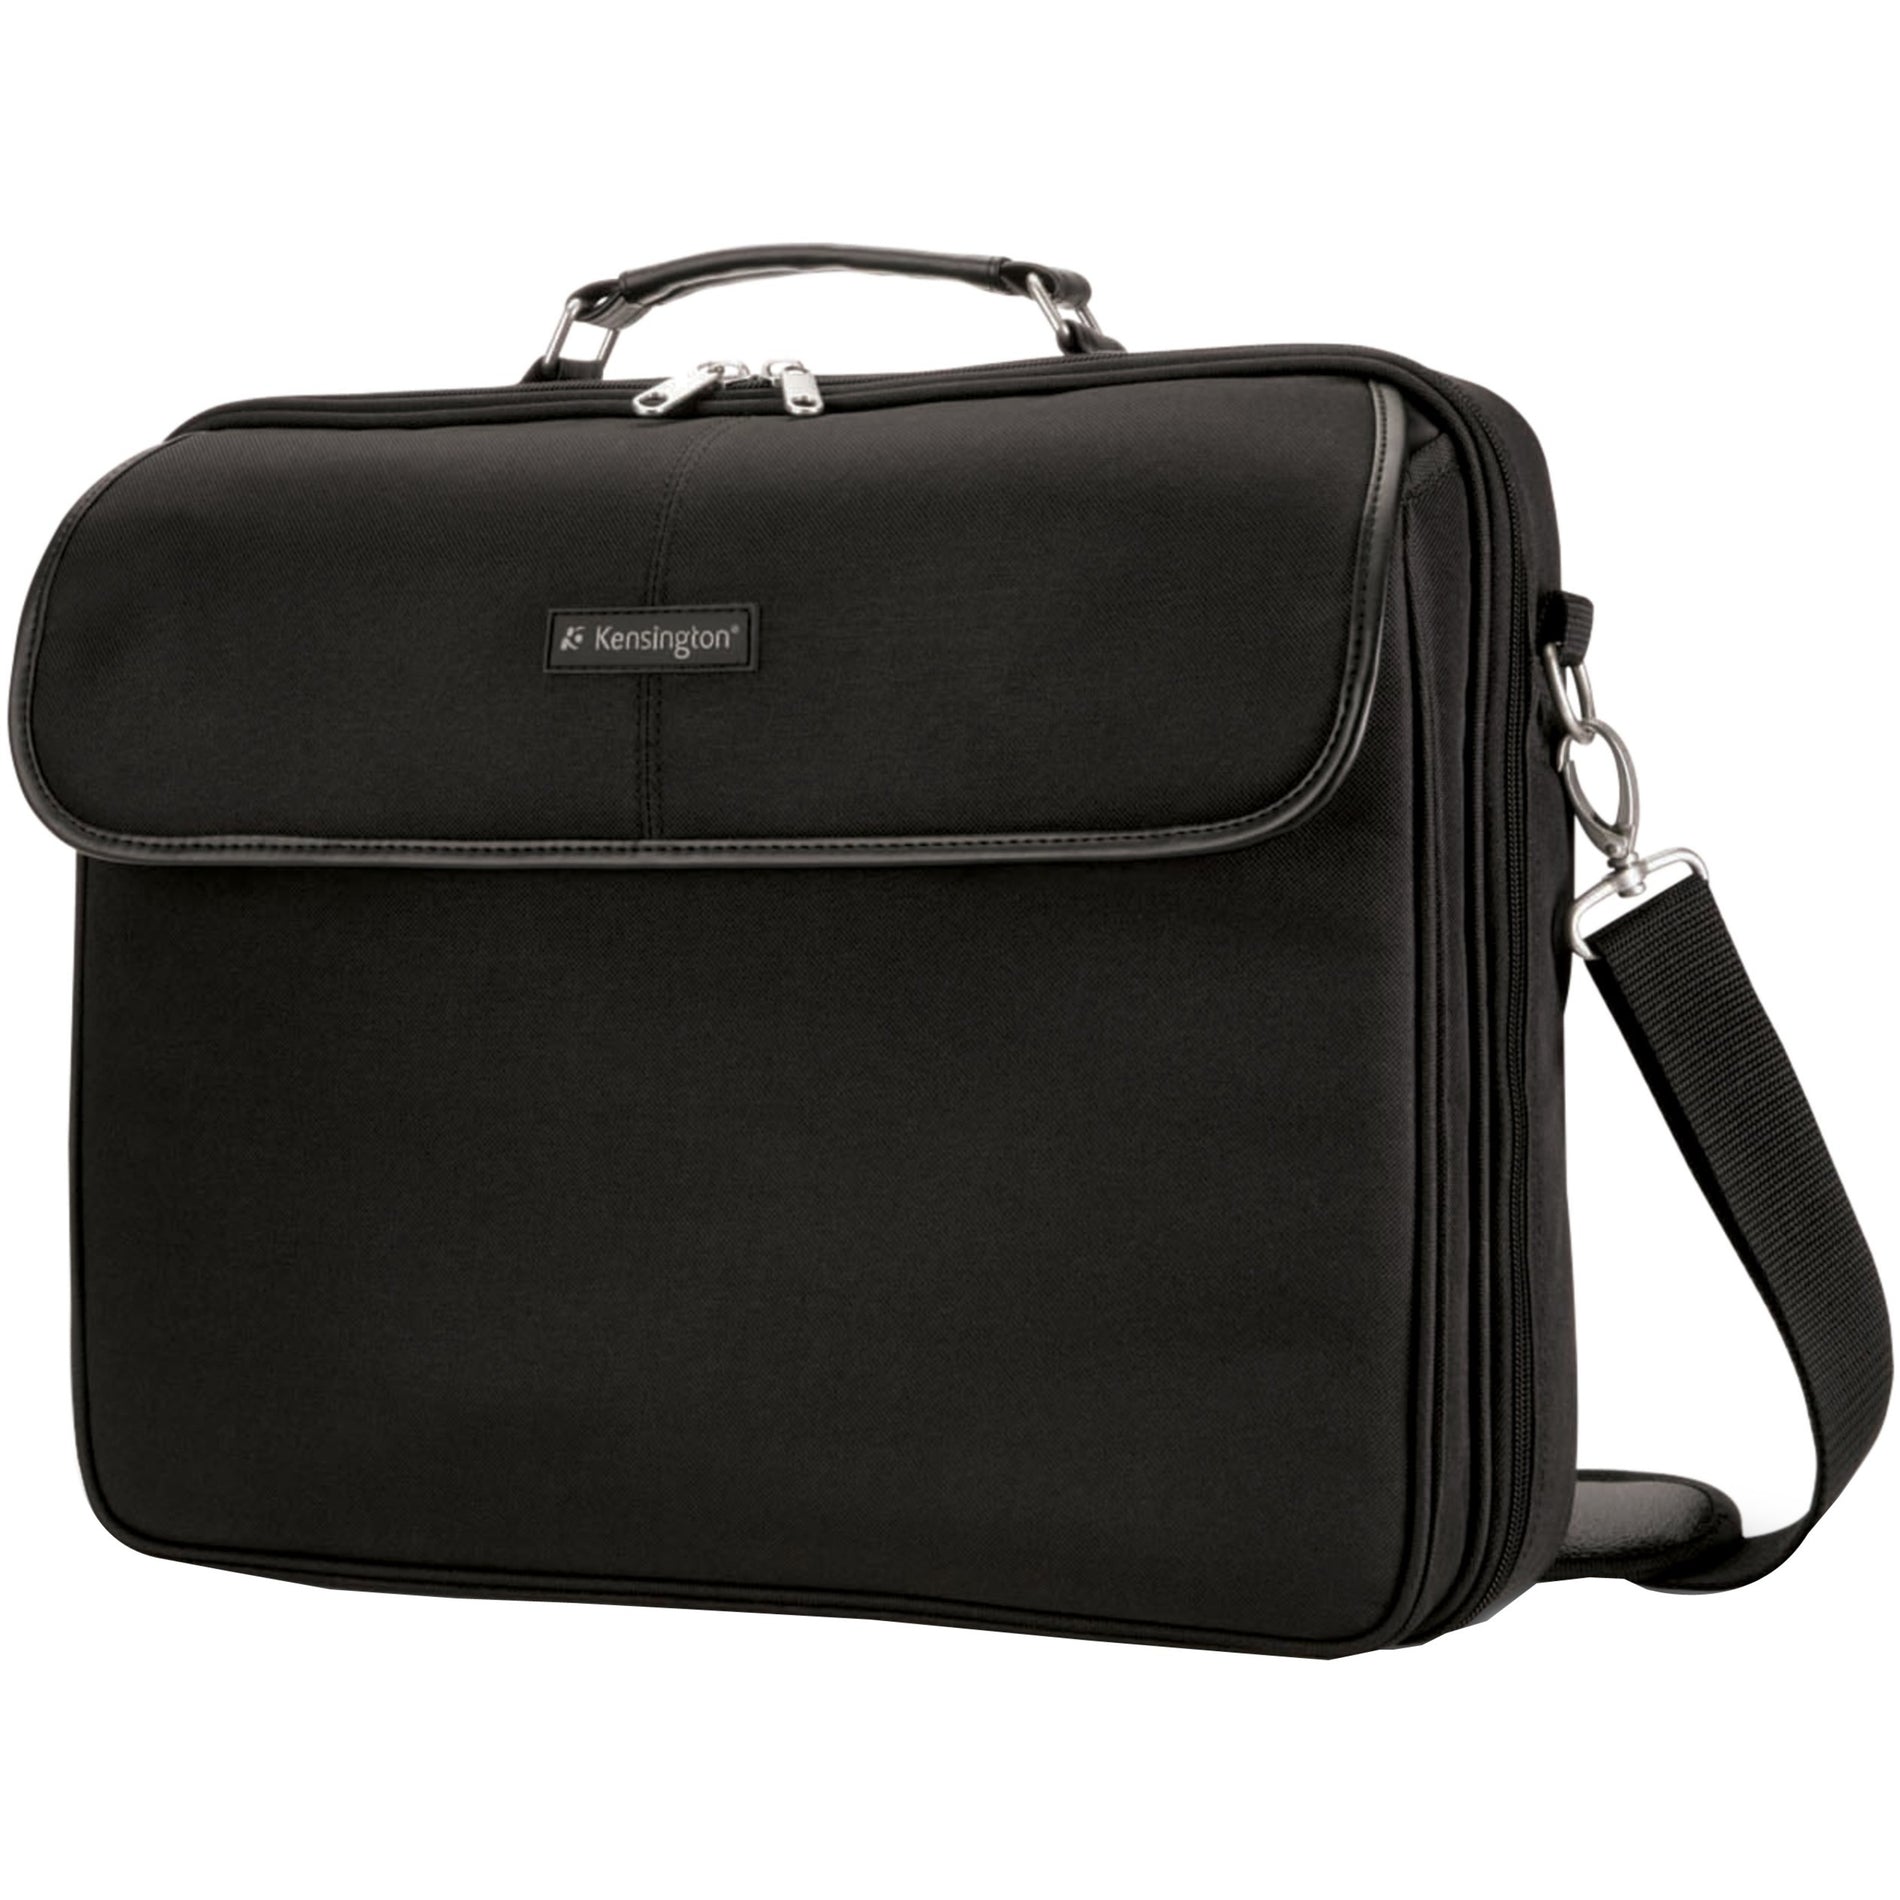 Kensington K62560USA Simply Portable SP30 Laptop Case - 15.6" Black, Convenient and Stylish Carrying Case for Accessories and Notebooks